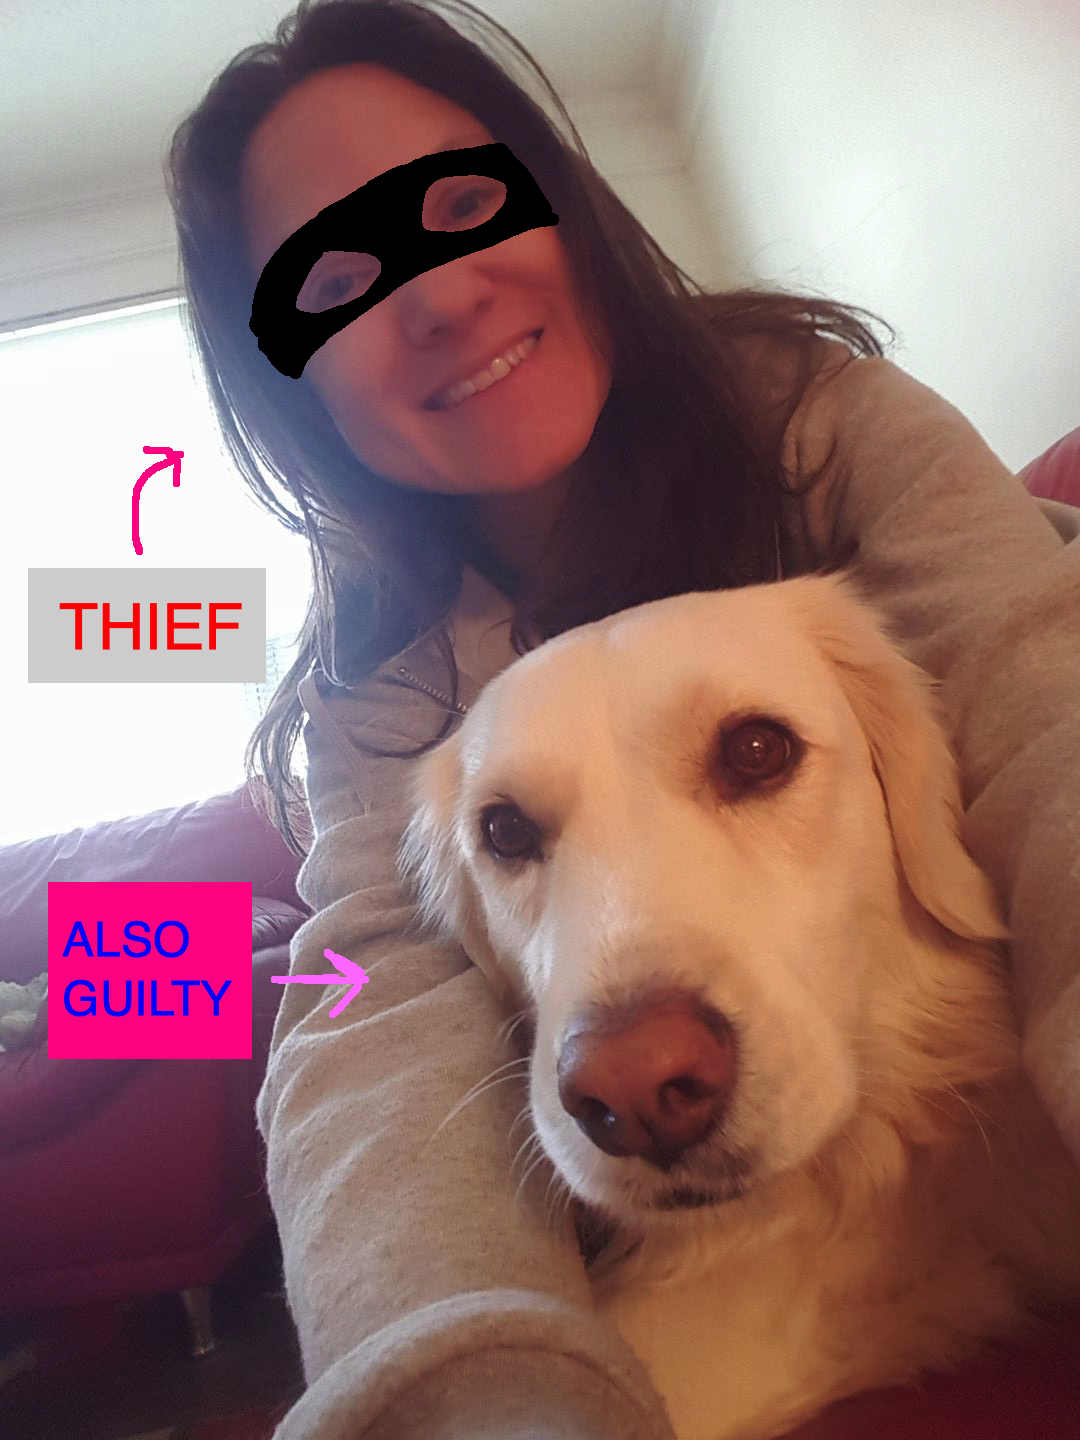 The incredible and beautiful Michelle (a female woman) 'wearing' a painted on bandit eye mask looking like zoro or a bank robber from the 1920's with her dog Mona (big yellow fluff dog)